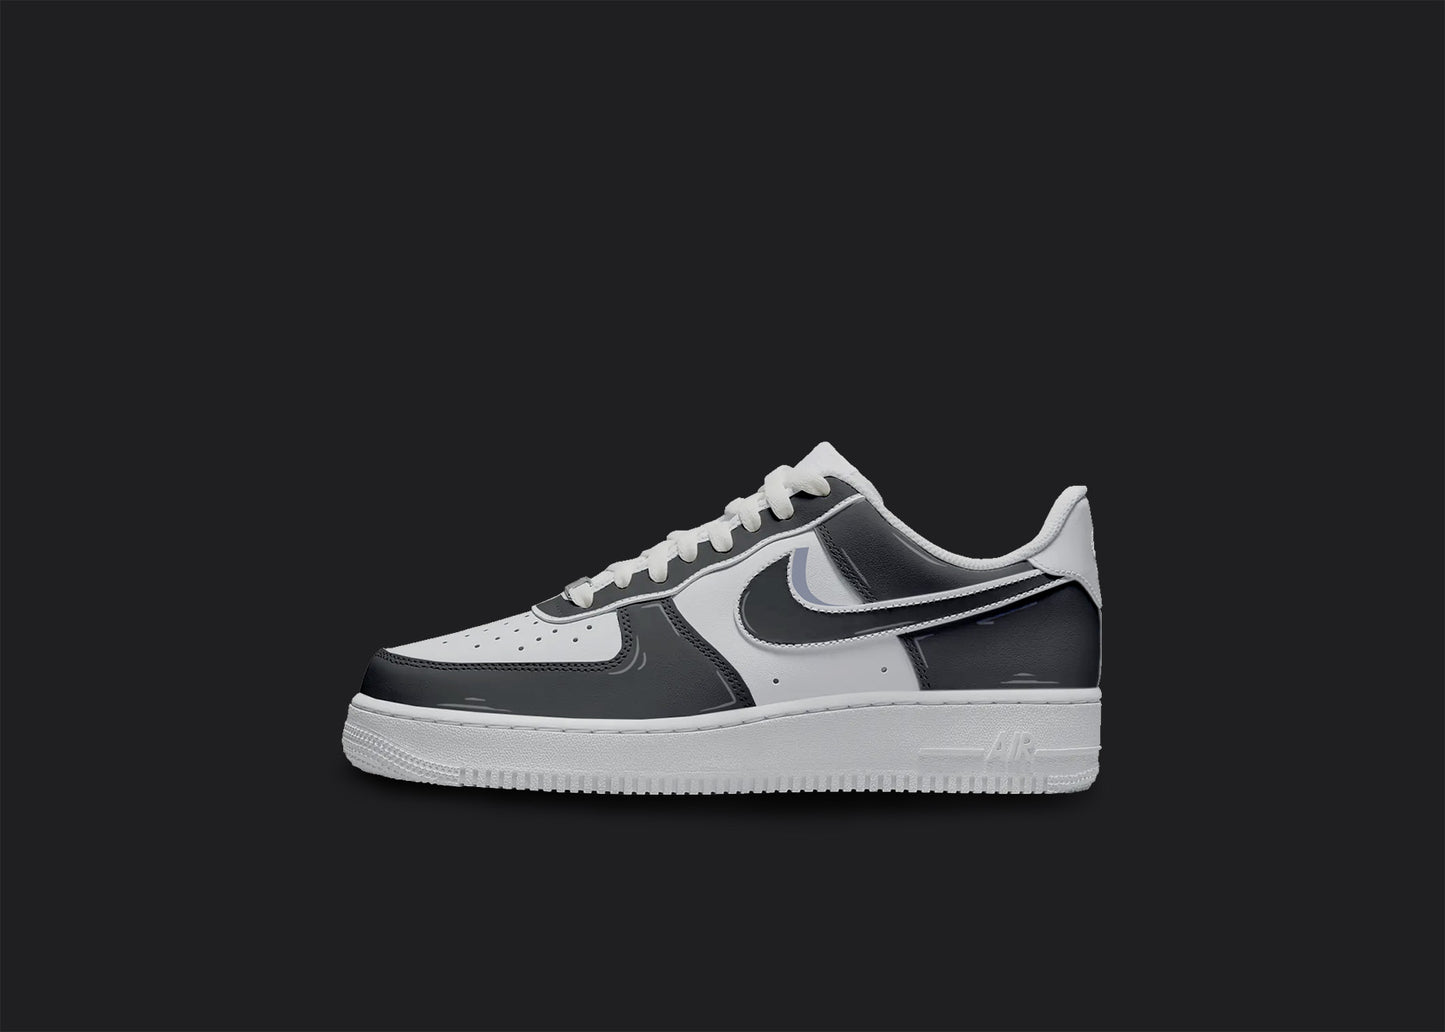 The image is of a Custom Nike Air force 1 sneaker on a blank black background. The white custom sneaker have a black cartoon styled design. 